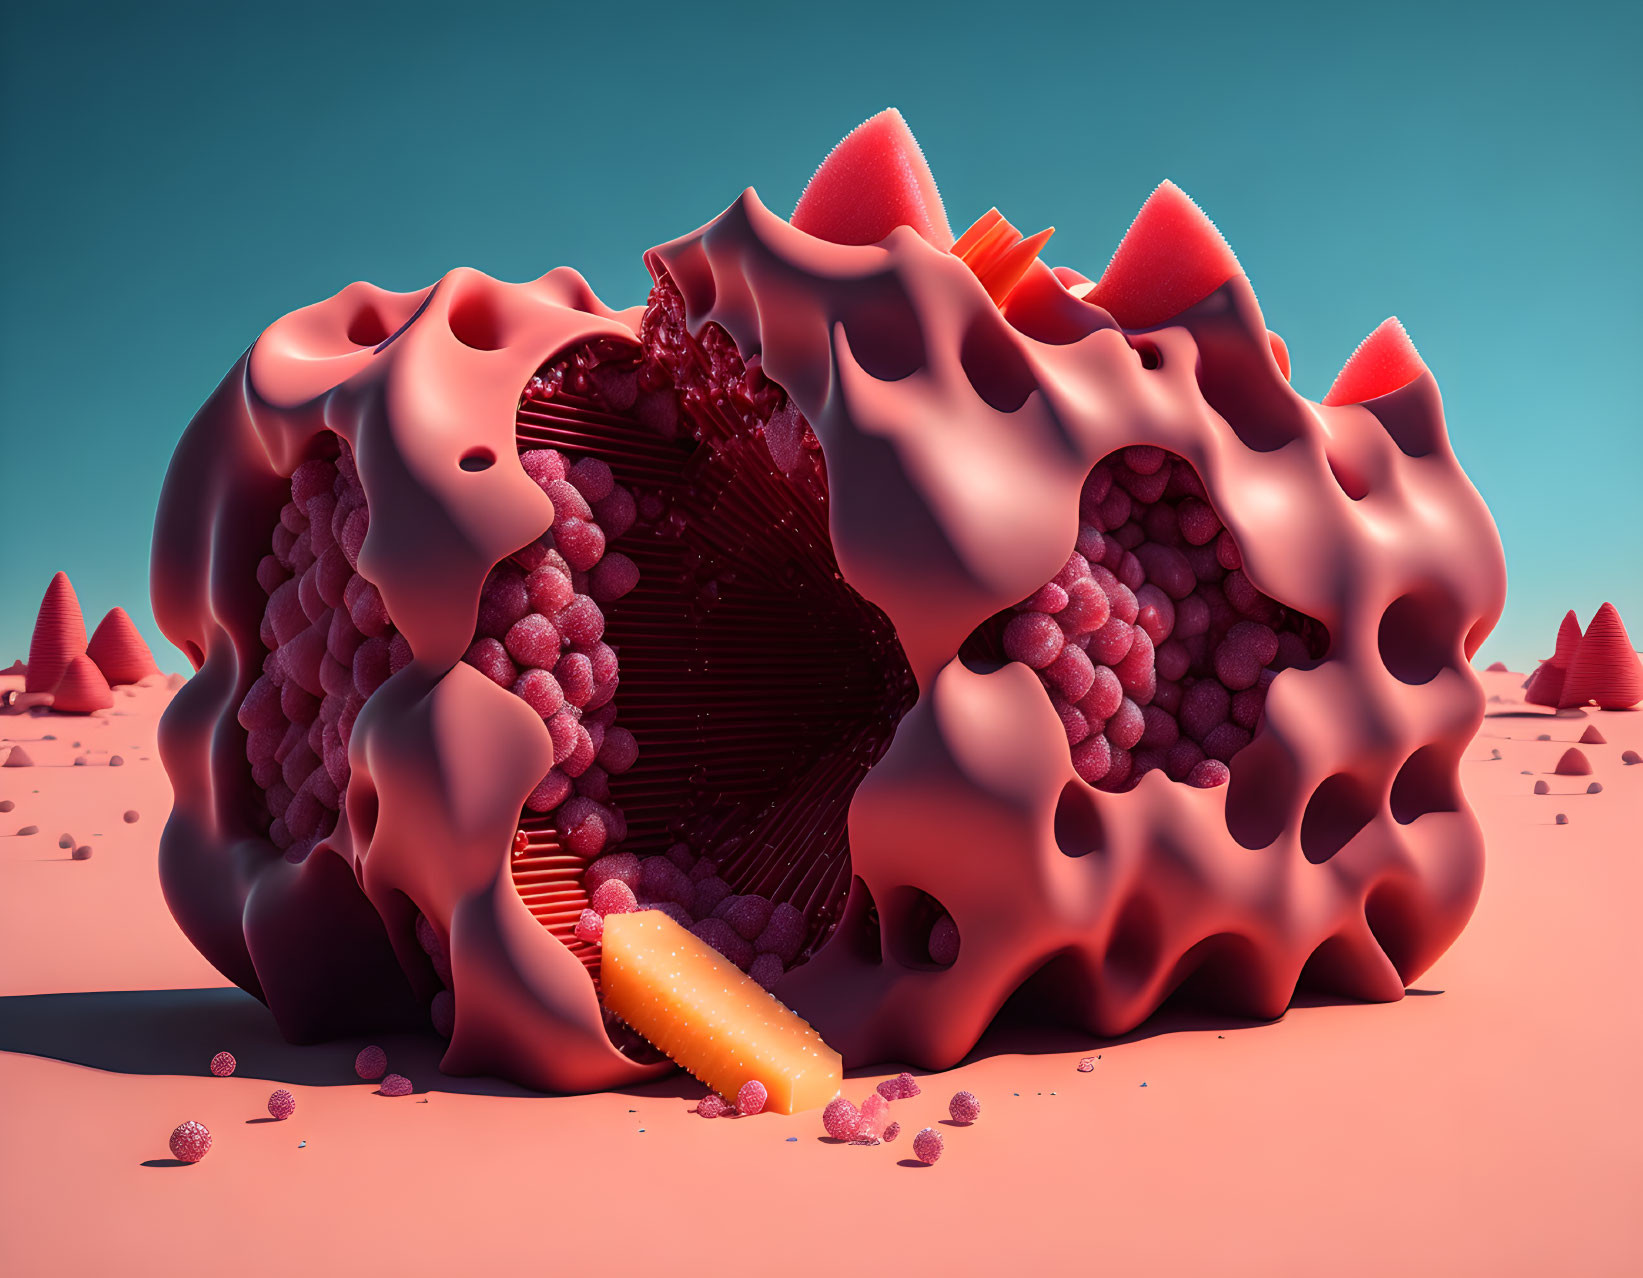 Surreal 3D-rendered landscape with red melty structure and conical shapes